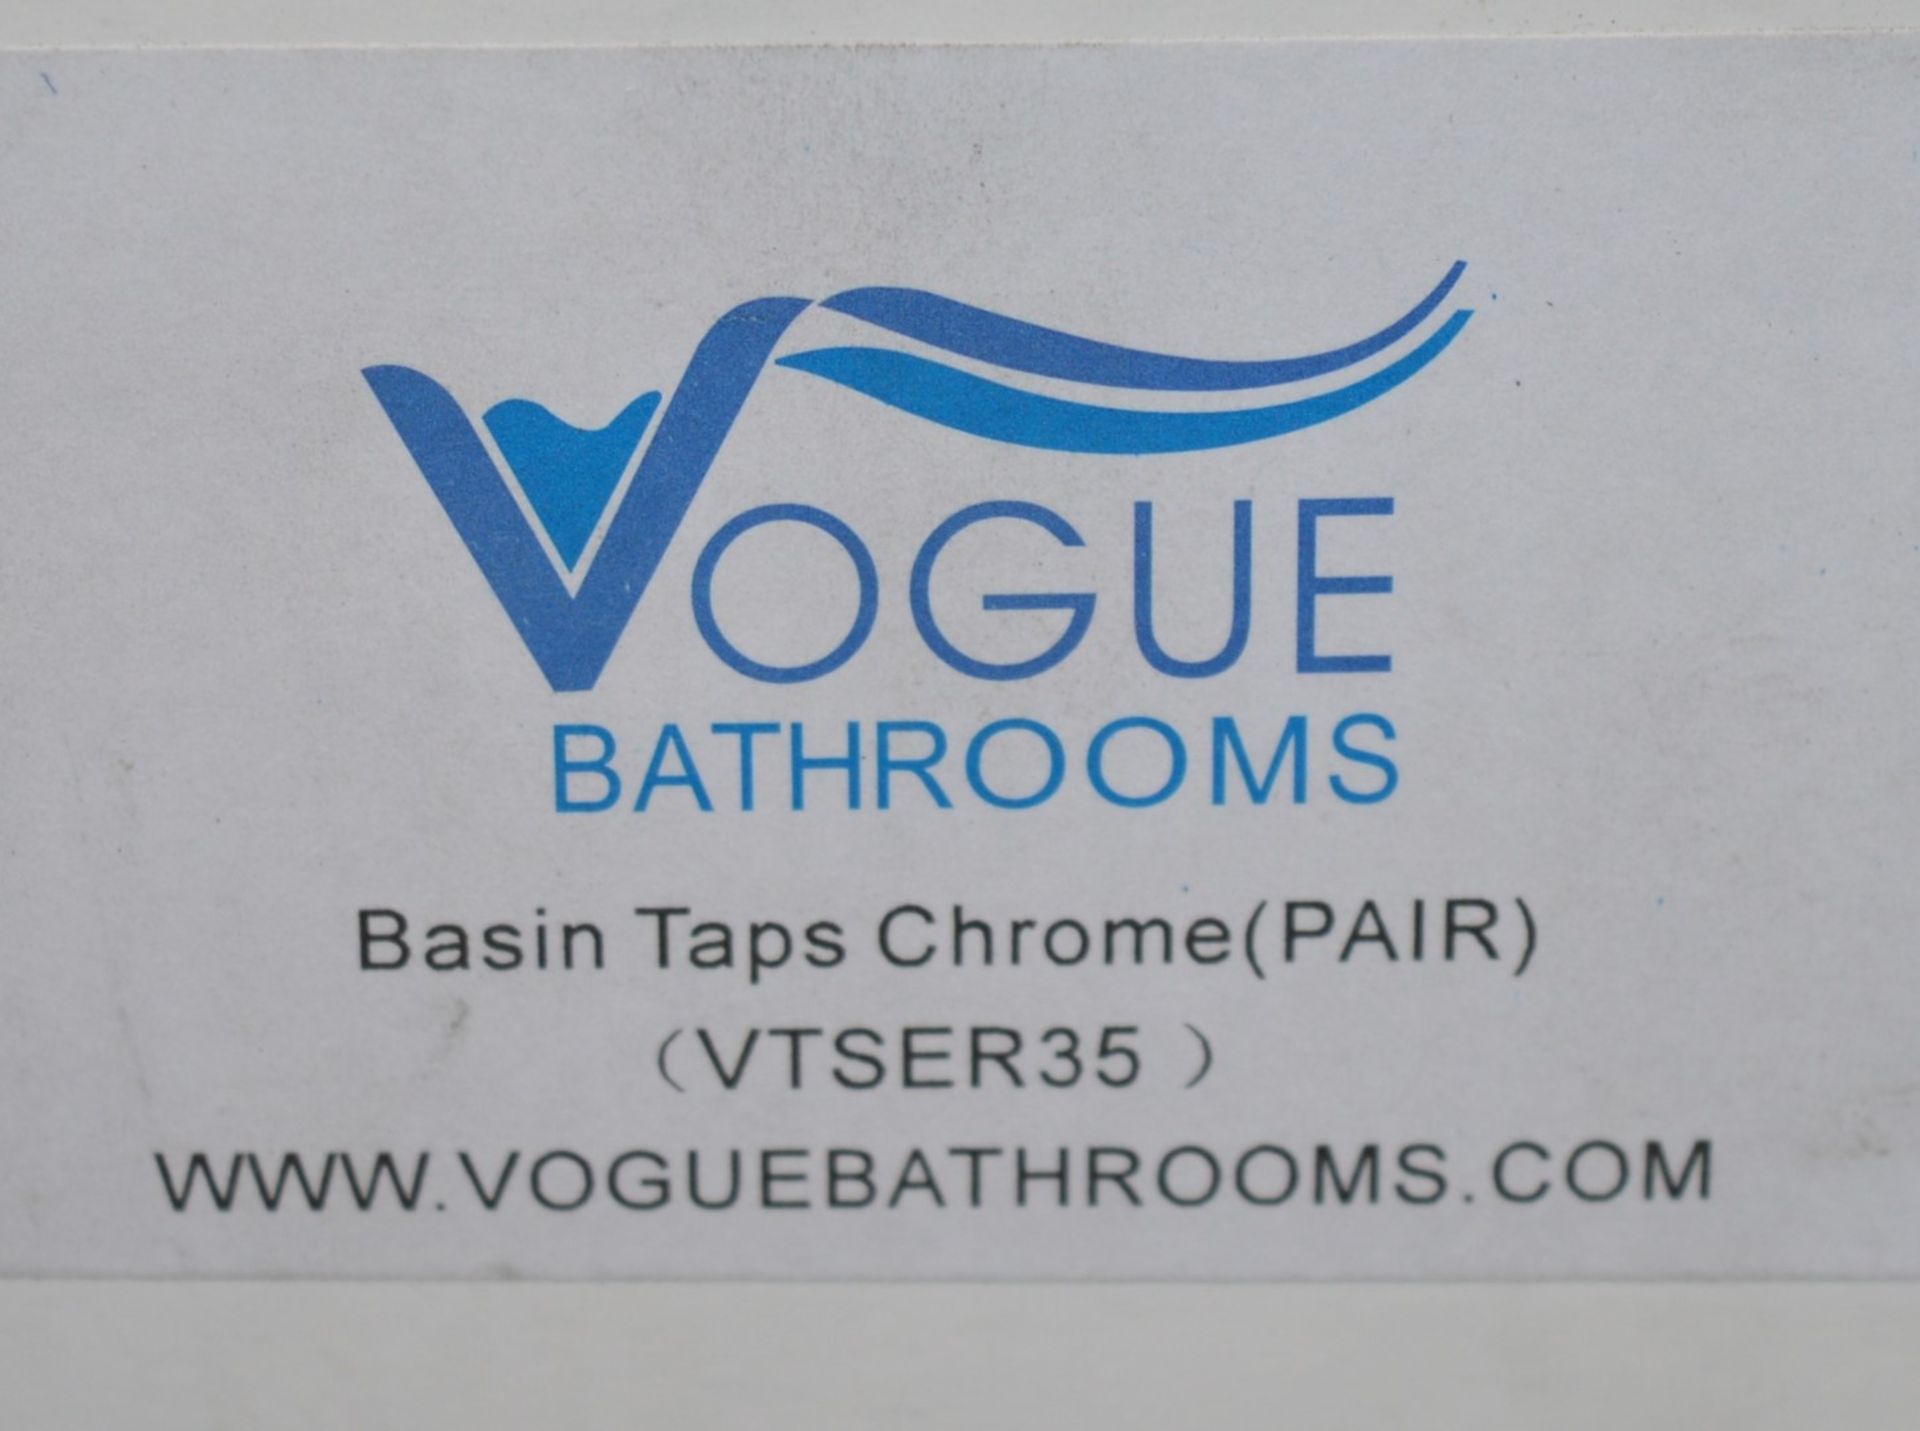 1 x Vogue Series 3 Sink Basin Taps in Chrome (Pair) - Modern Bath Mixer Tap in Bright Chrome - - Image 7 of 7